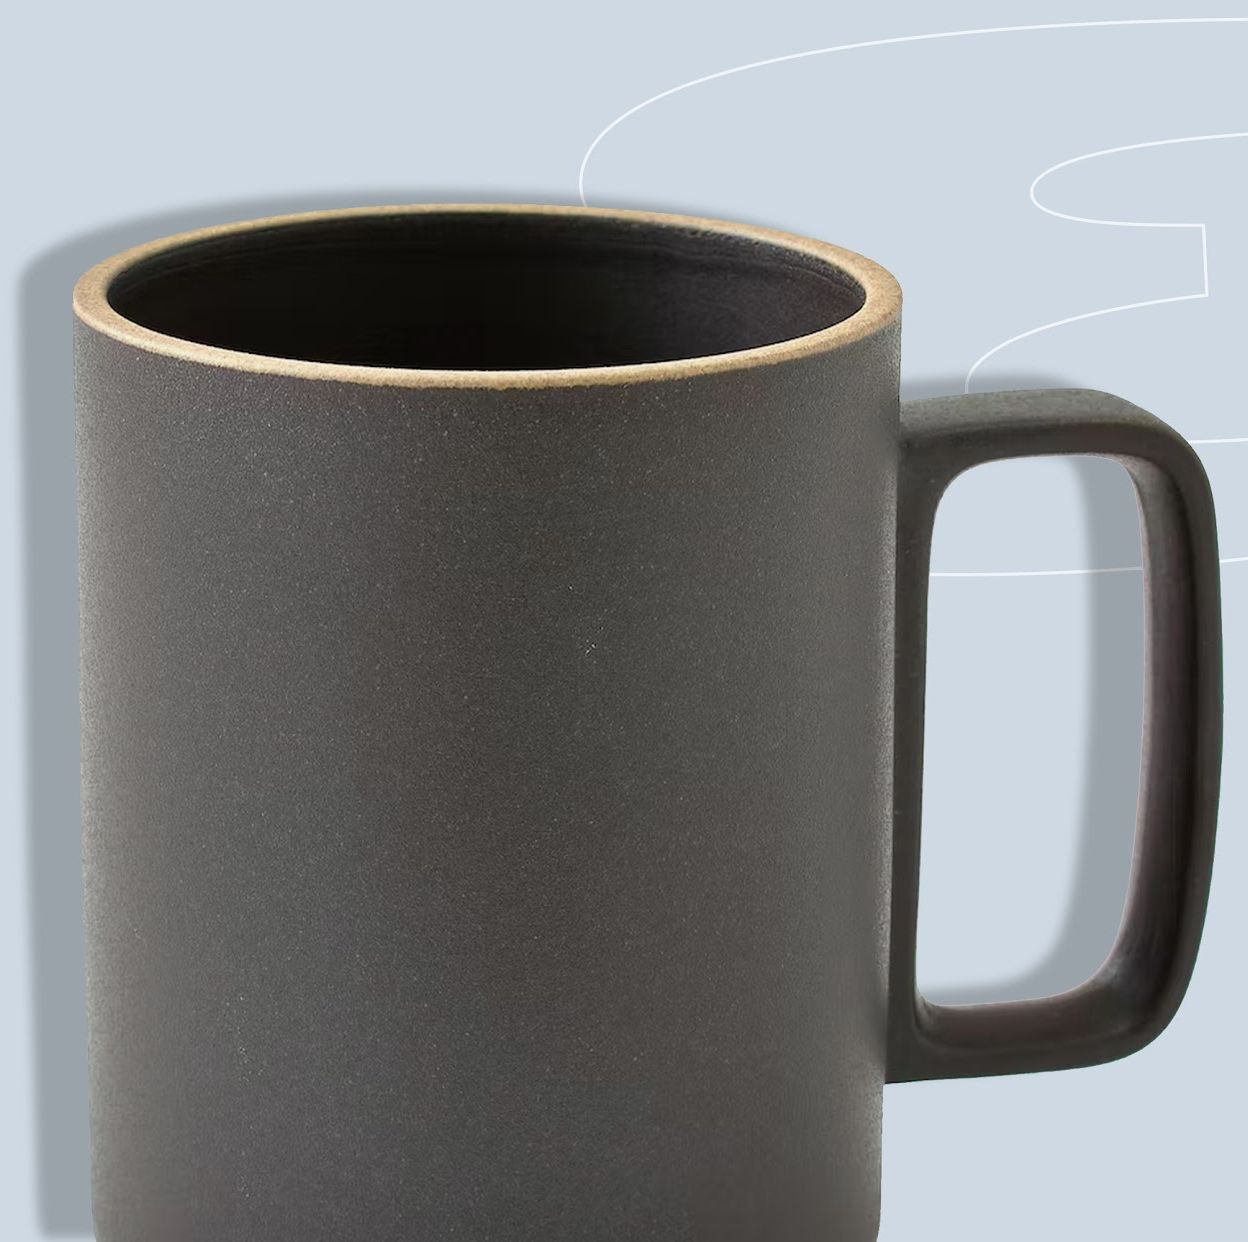 23 Great Coffee Mugs For Superior At-Home Sipping